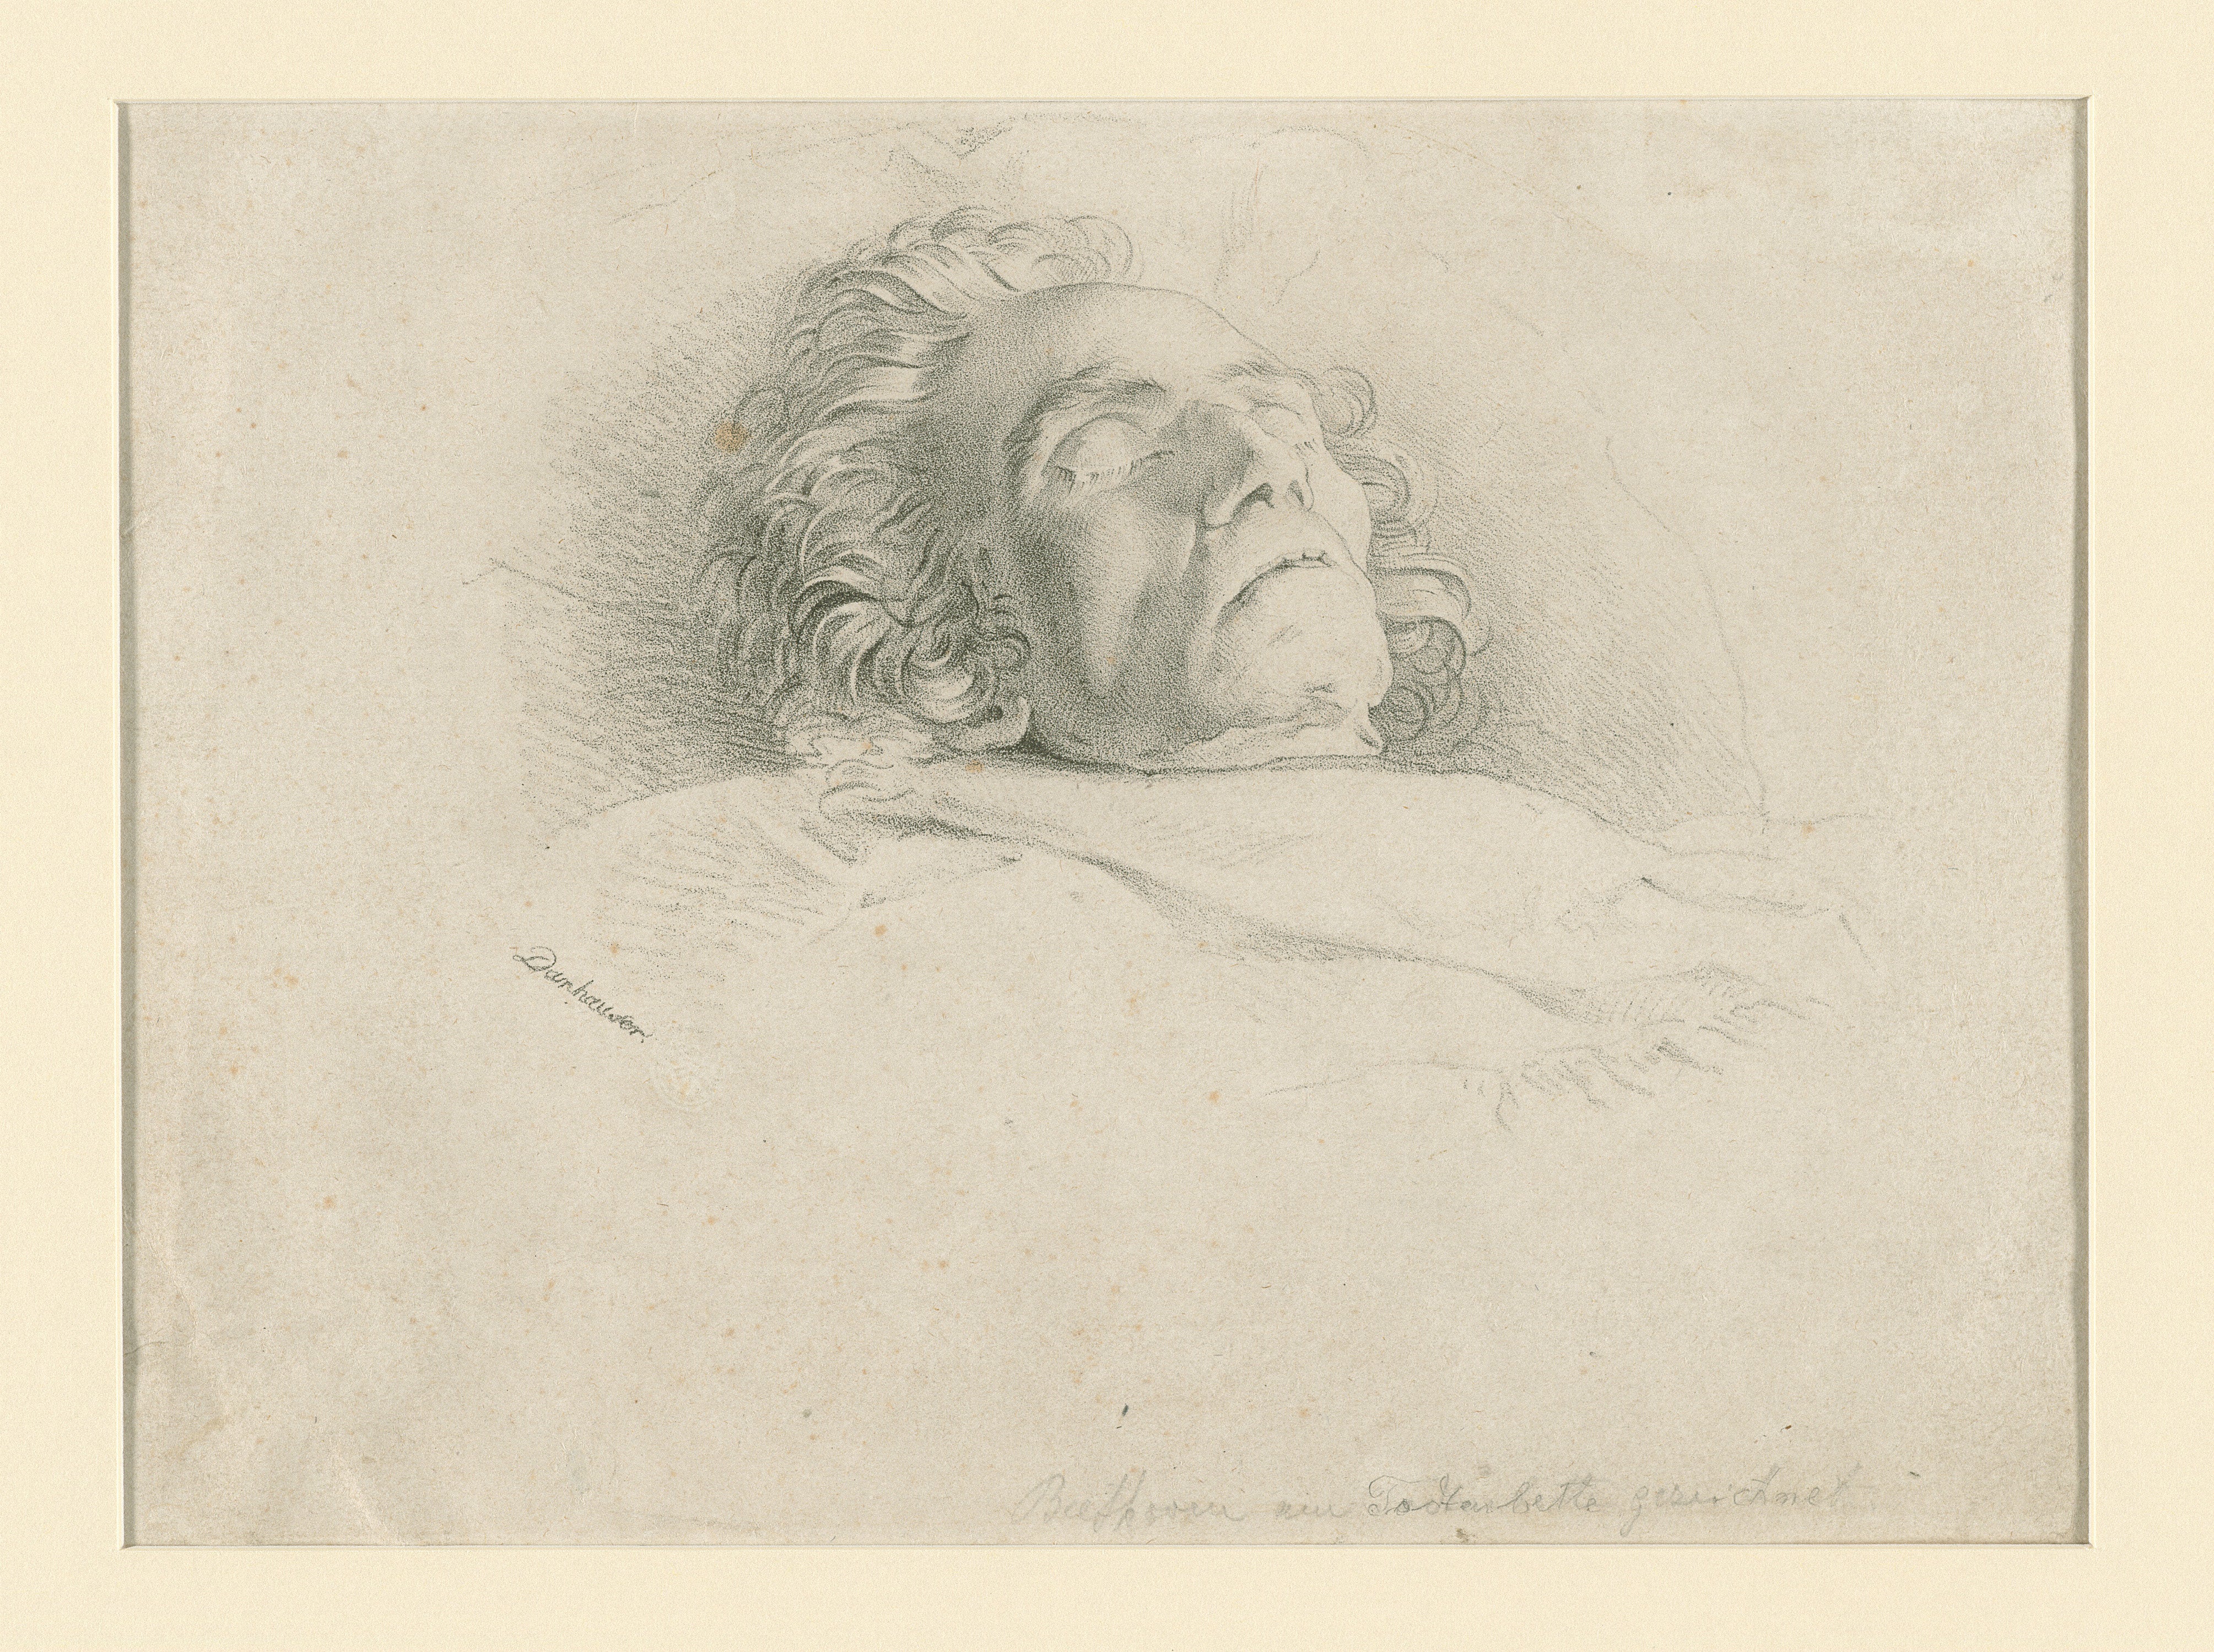 A lithograph of Beethoven on his deathbed. (Illustration: Beethoven-Haus Bonn)